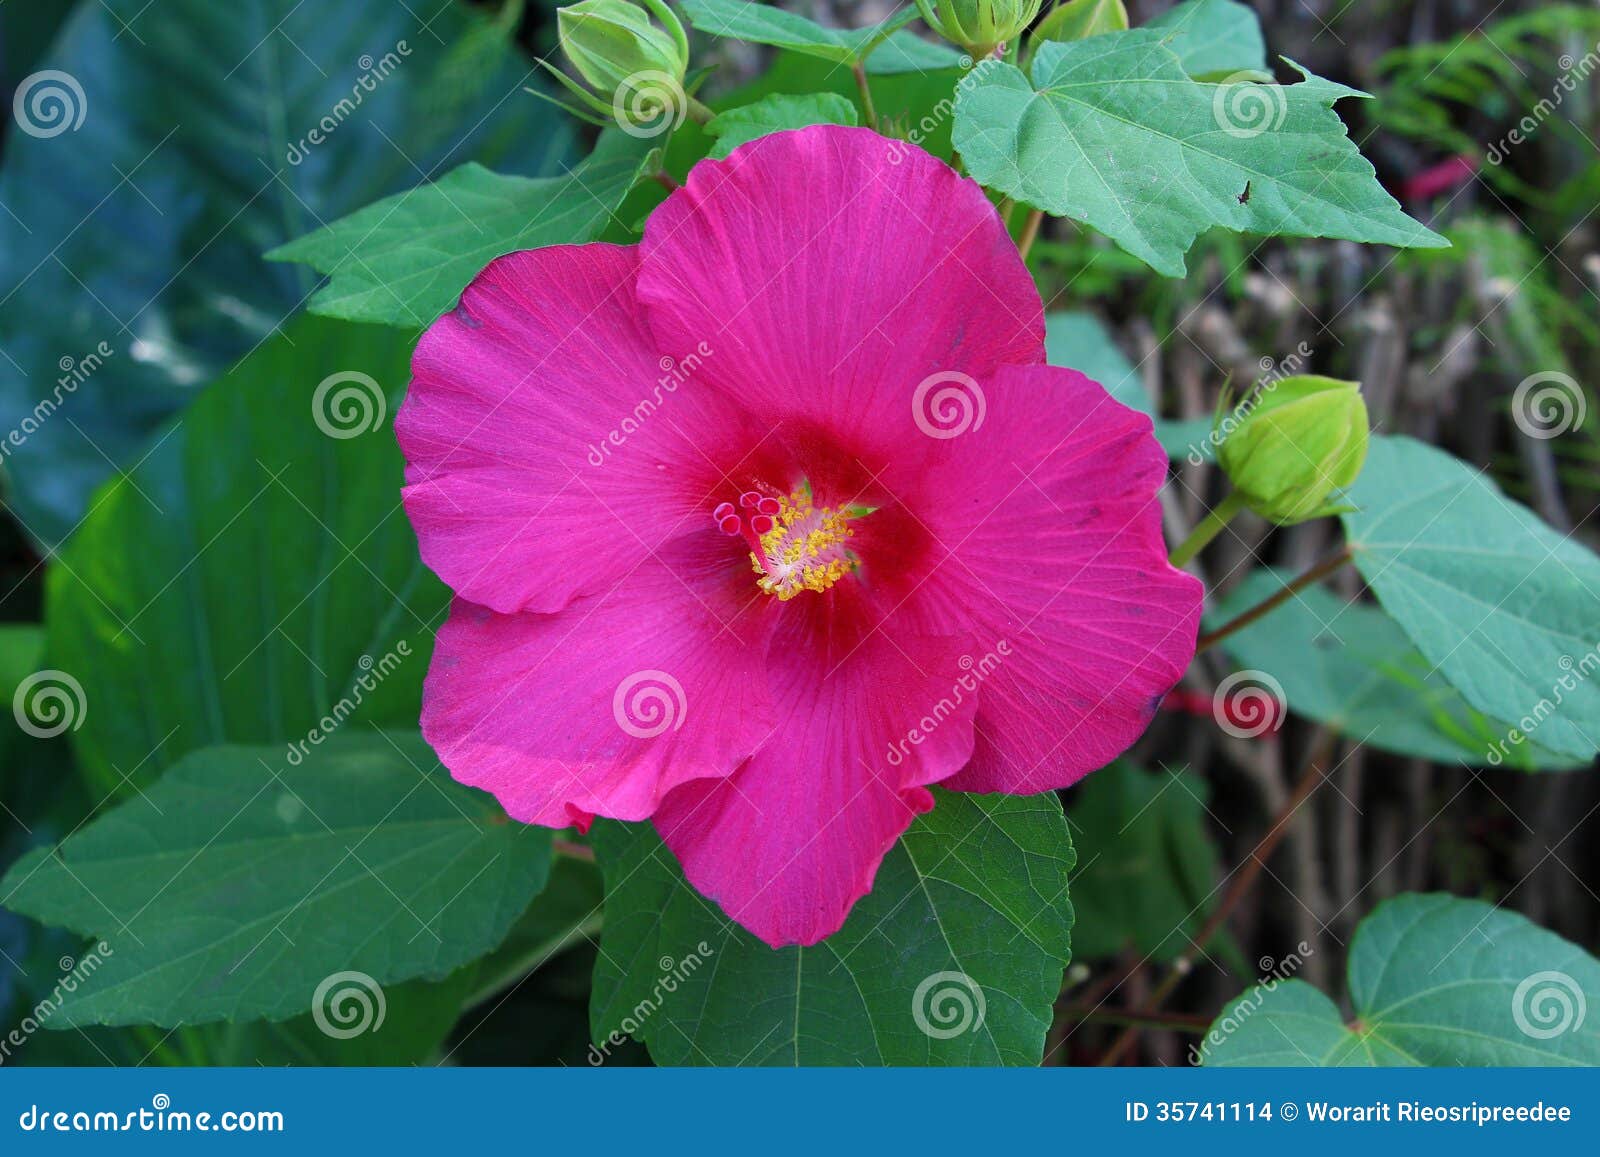 clipart rose of sharon - photo #31